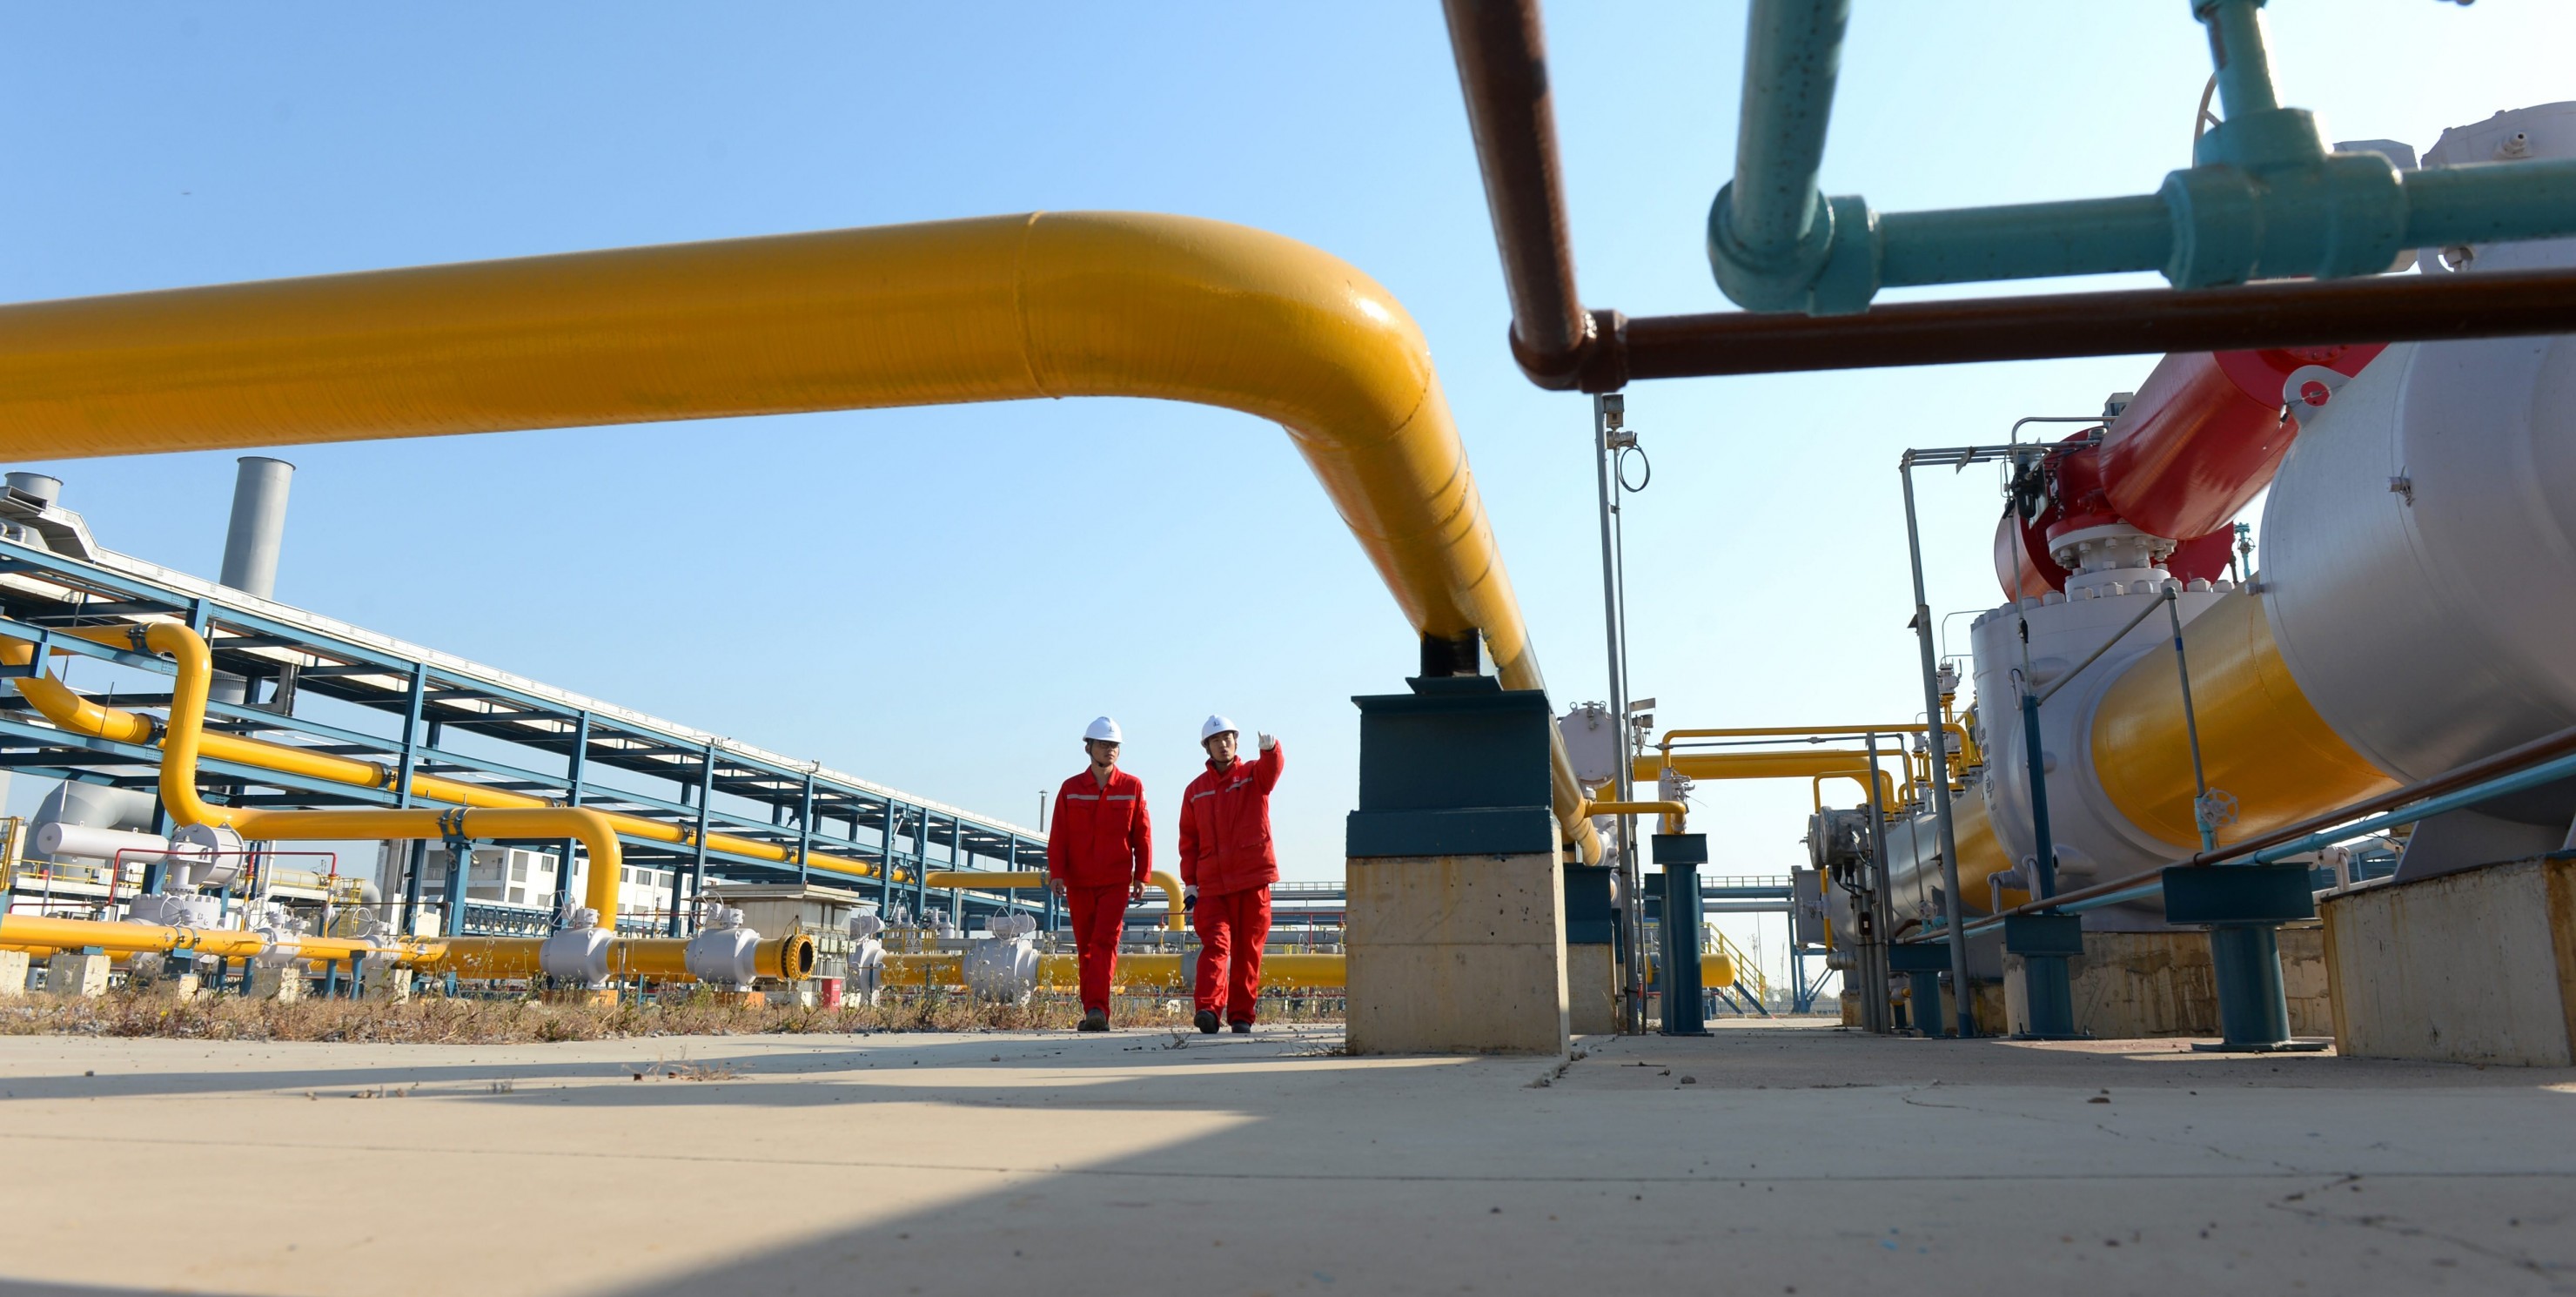 Technicians inspect pipelines at a liquefied natural gas (LNG) terminal operated by China Petrochemical Corporation (Sinopec Group)